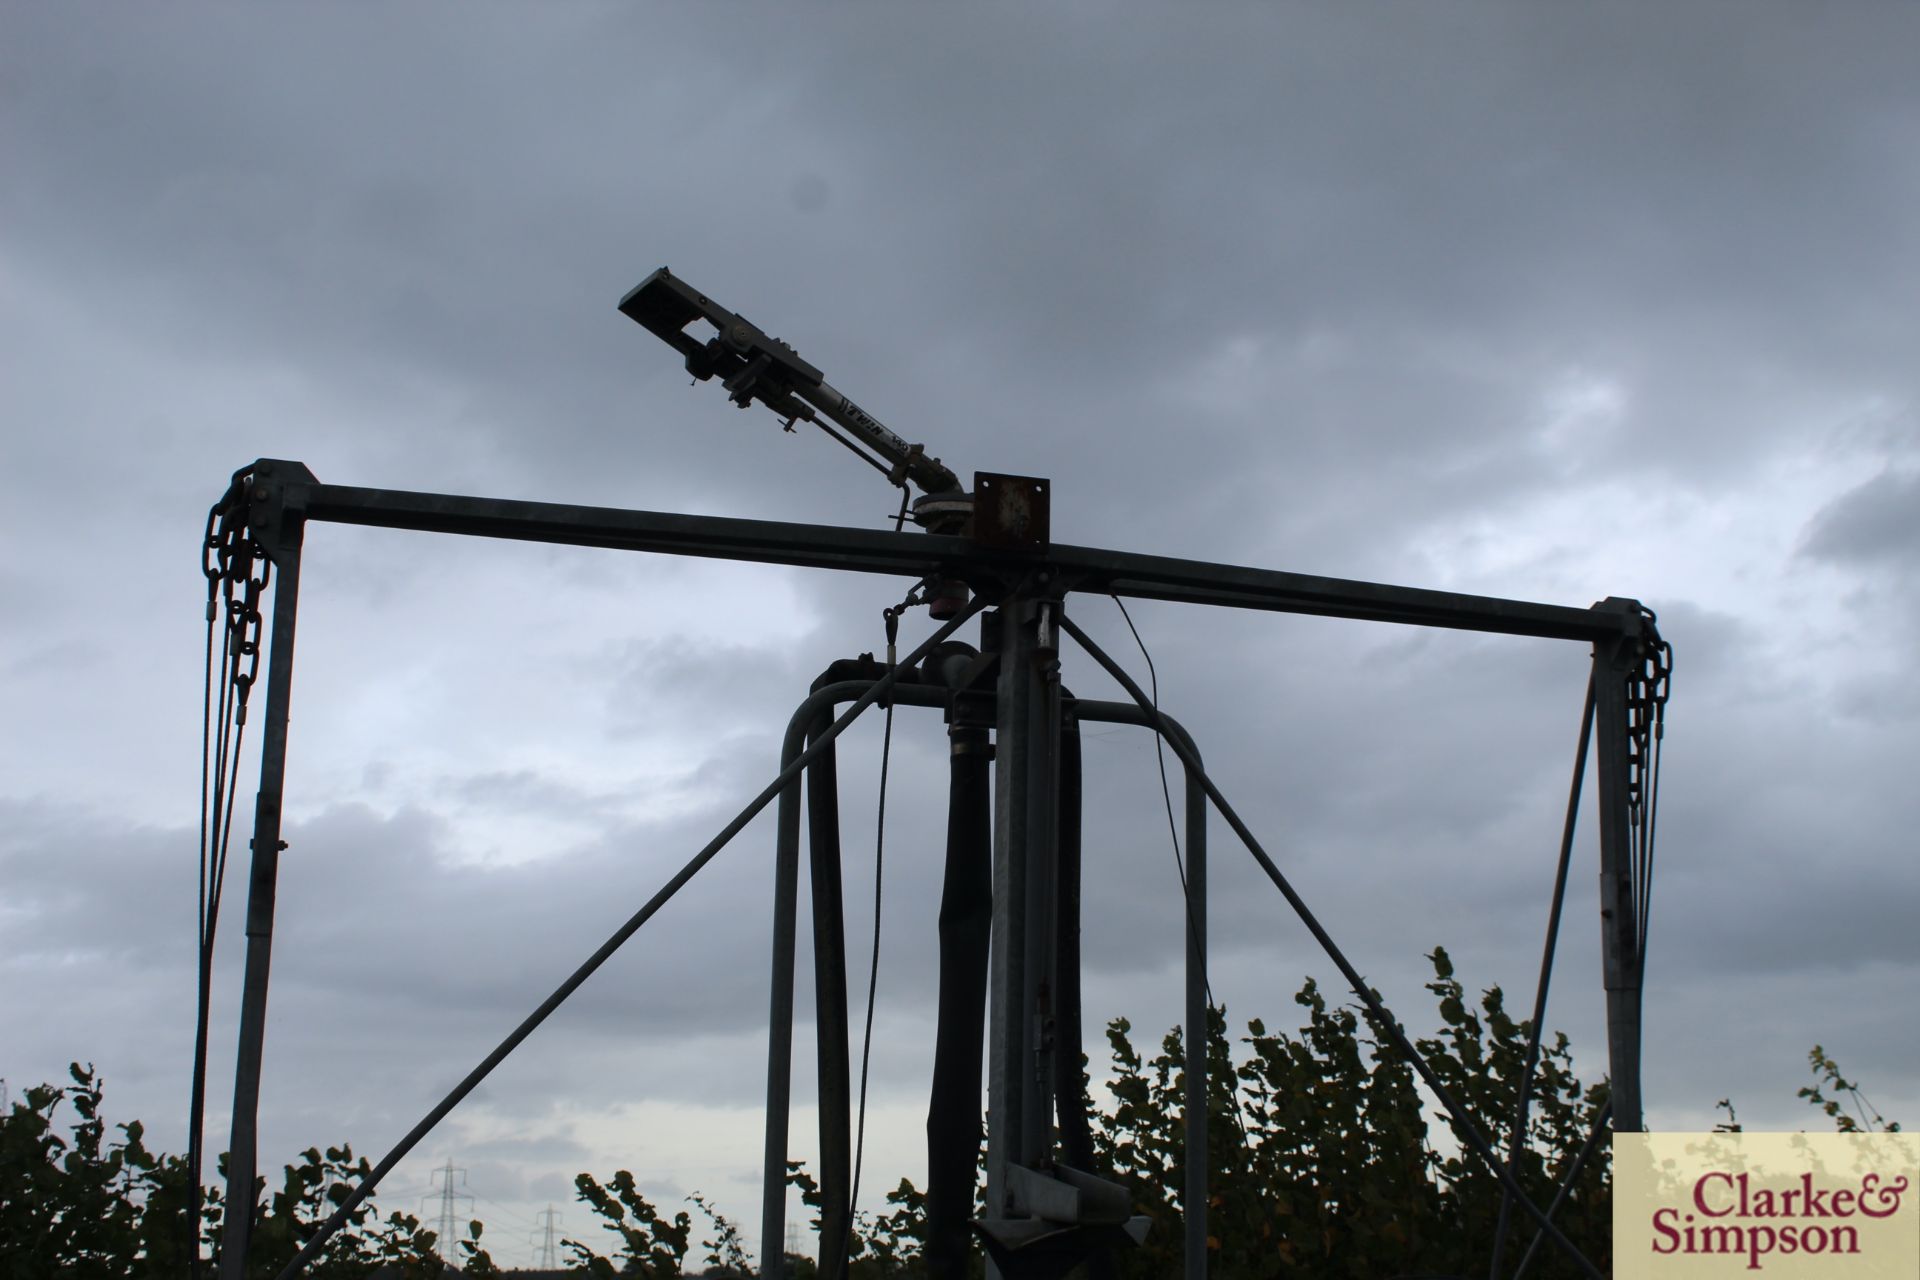 Bauer 64m spray boom irrigator. With 140 rain gun and further full boom section for spares. - Image 5 of 13